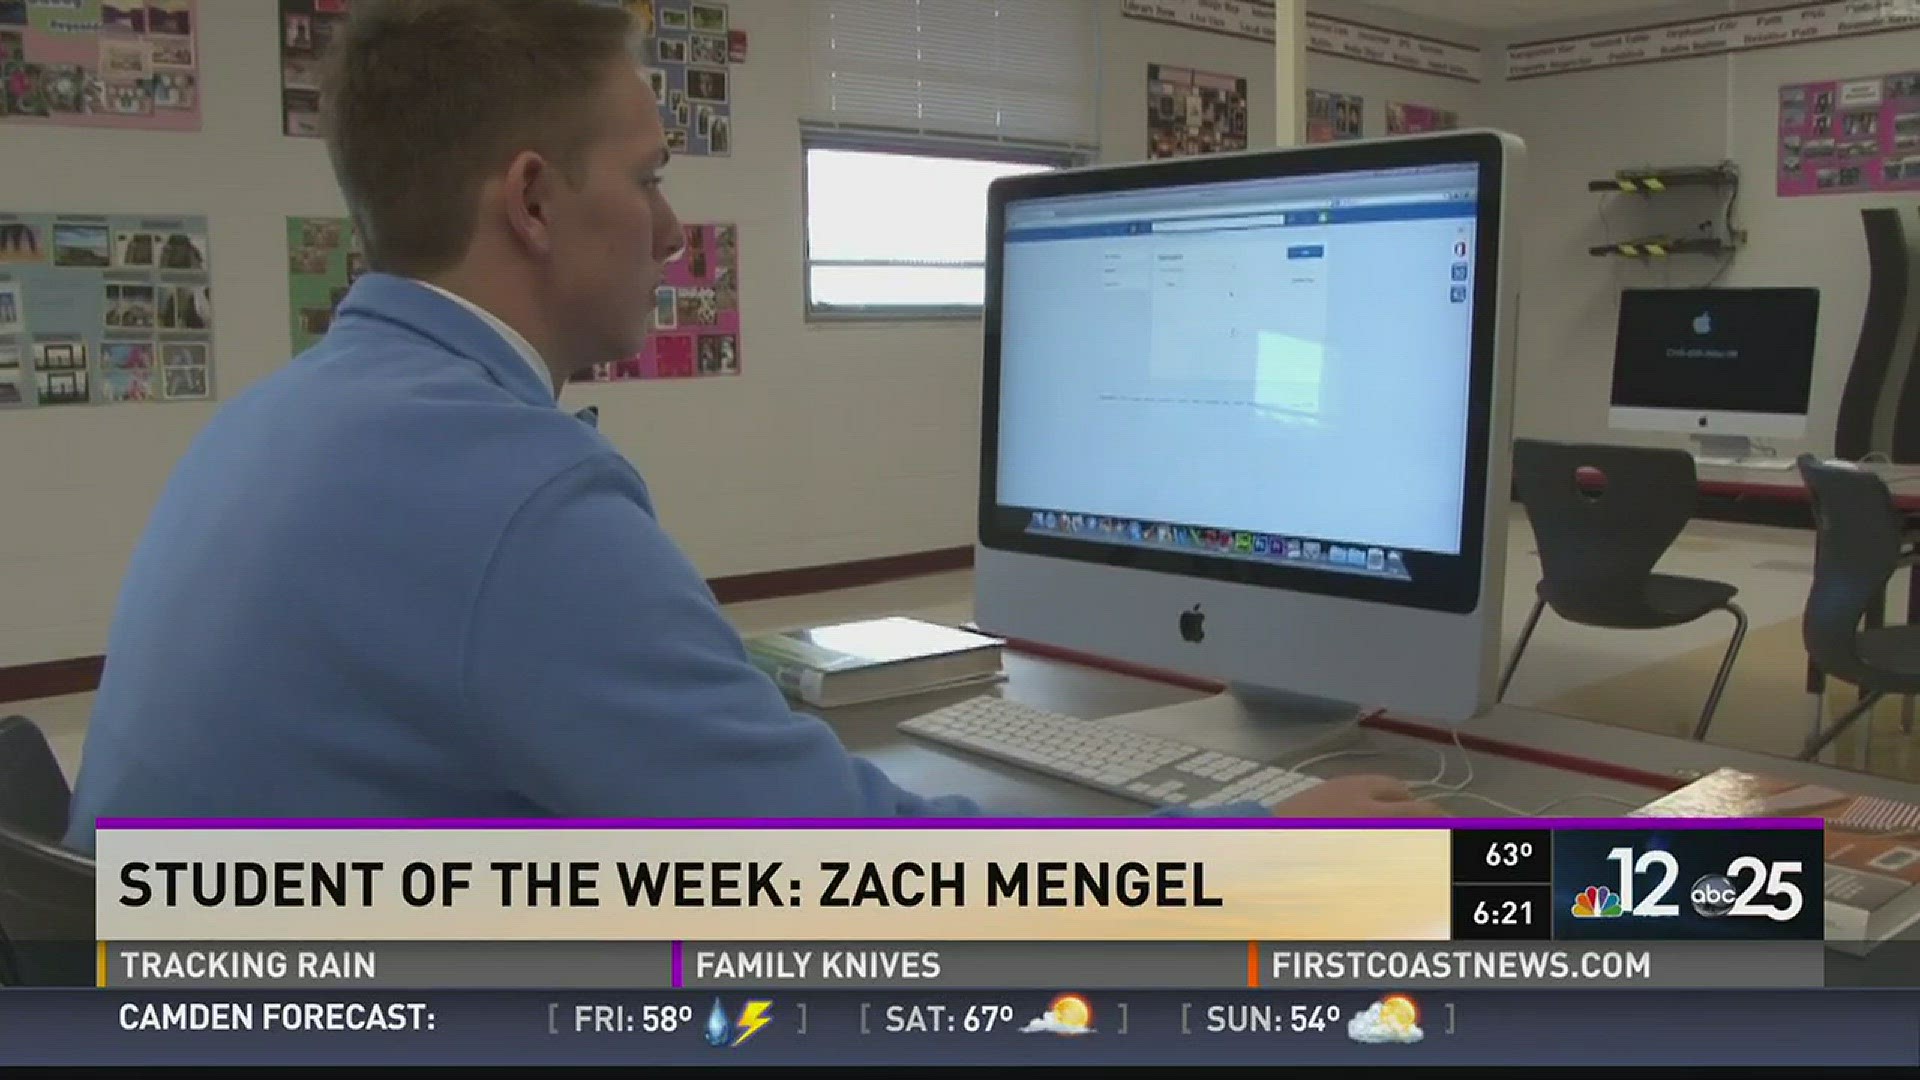 Zach Mengel is the student of the week.